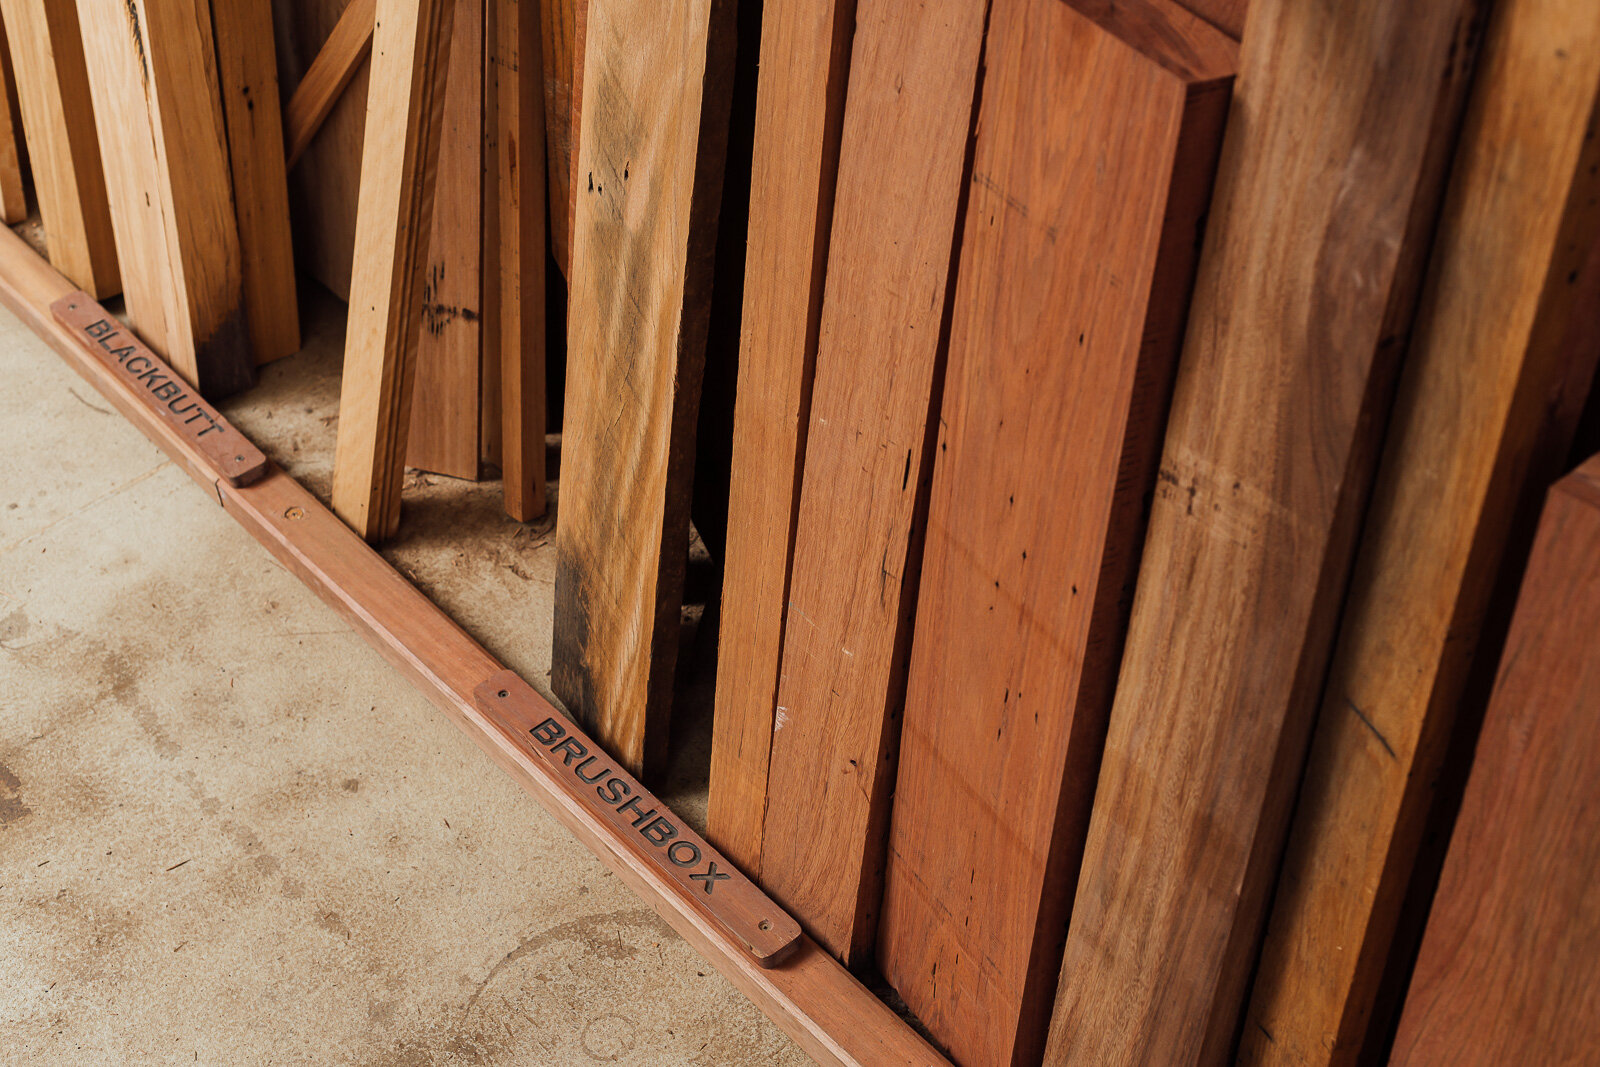 Blackbutt and Brushbox recycled timber slab at Thor's Hammer warehouse